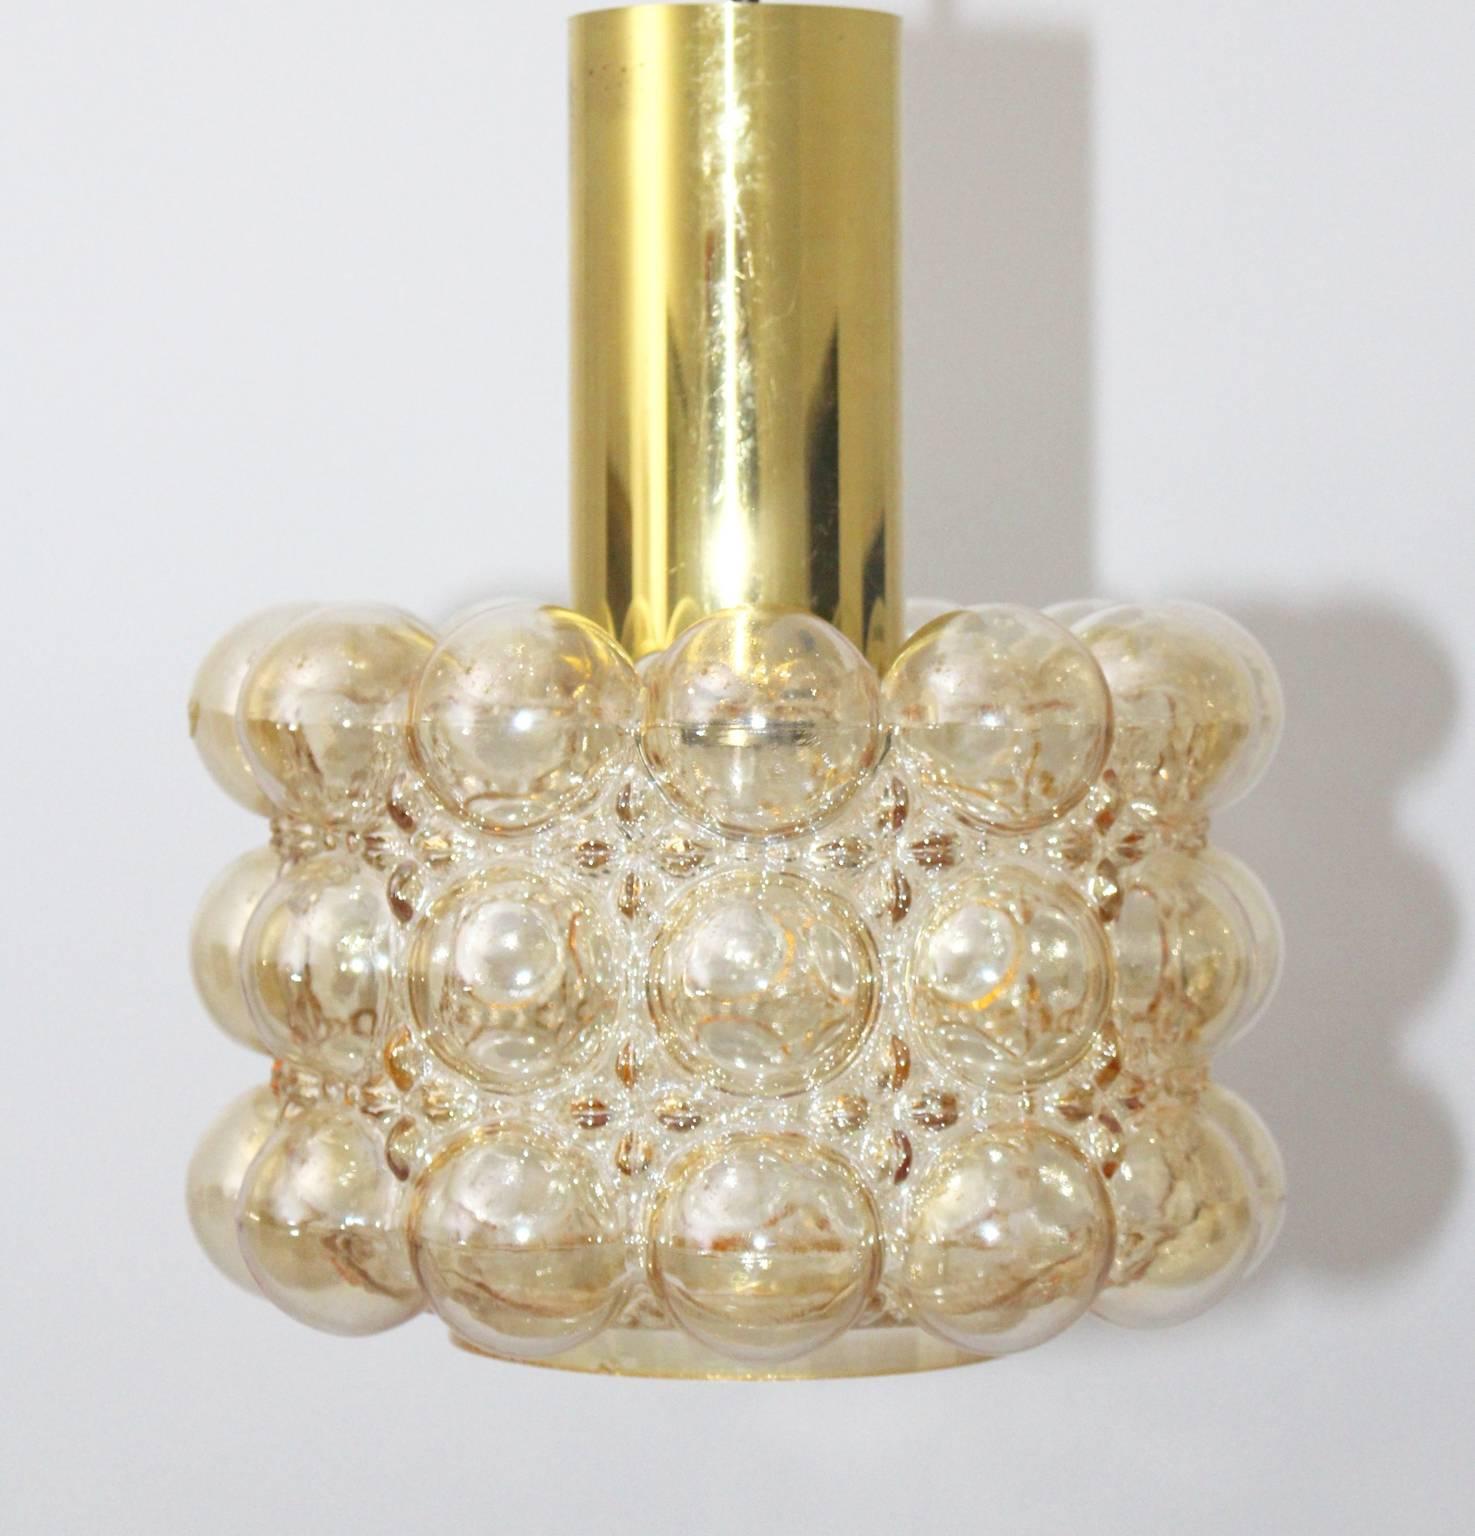 Mid century modern vintage pendant or chandelier designed by Helena Tynell and manufactured by Glashütte Limburg, Germany, 1960s.
The amber colored glass shade has nice bubbles and the stem was made of brass.
One E 27 socket.
all measures are